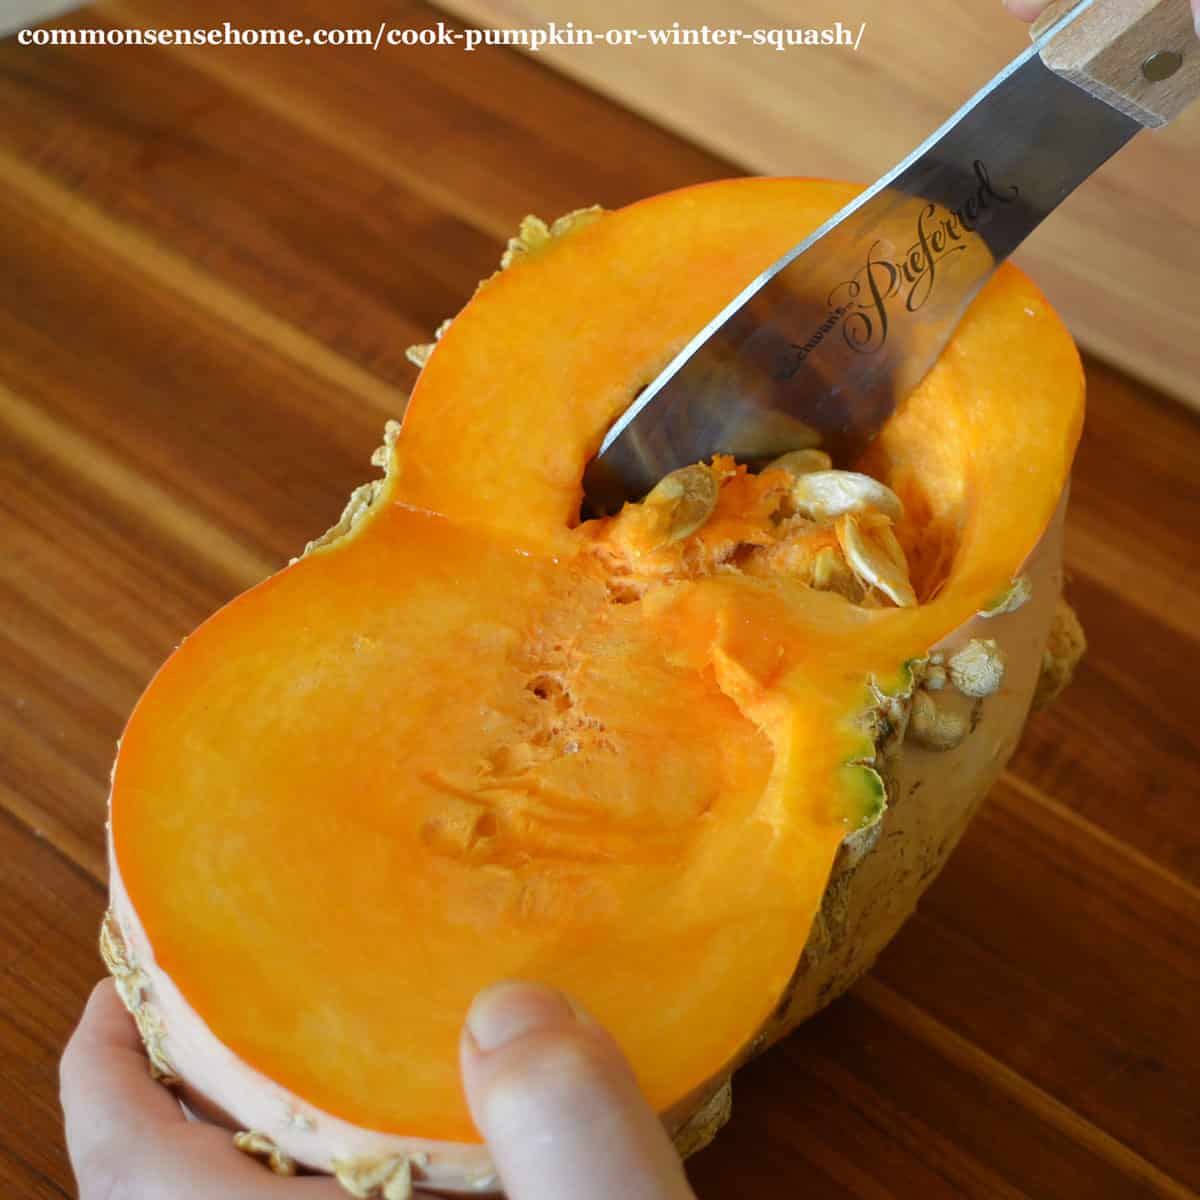 scooping seeds out of raw pumpkin half